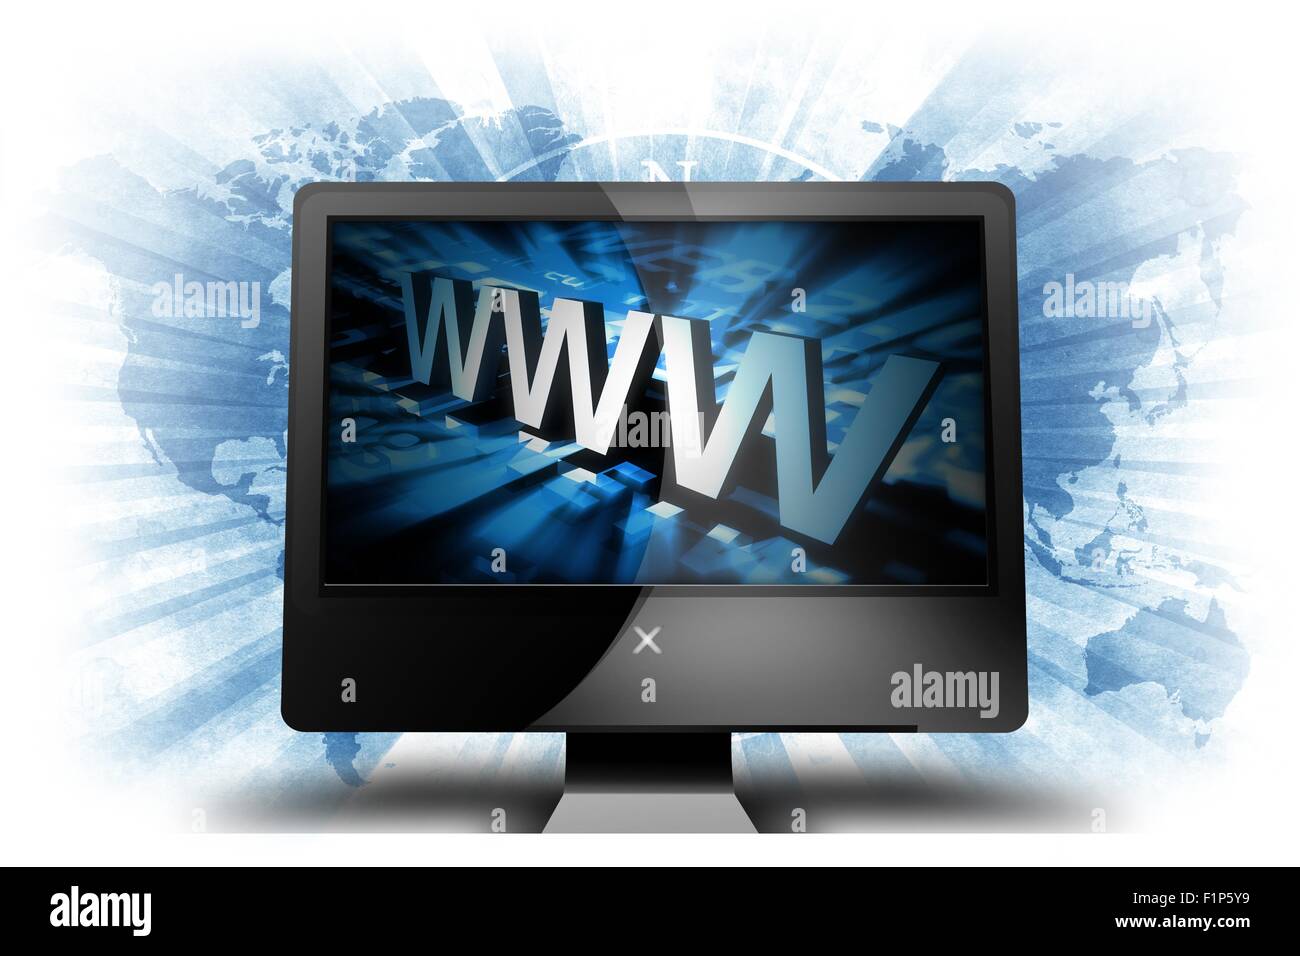 Modern Computer with Wide Screen Display. 3D WWW on Screen. Grungy Blue World Map in Background. Technology Illustration. Stock Photo